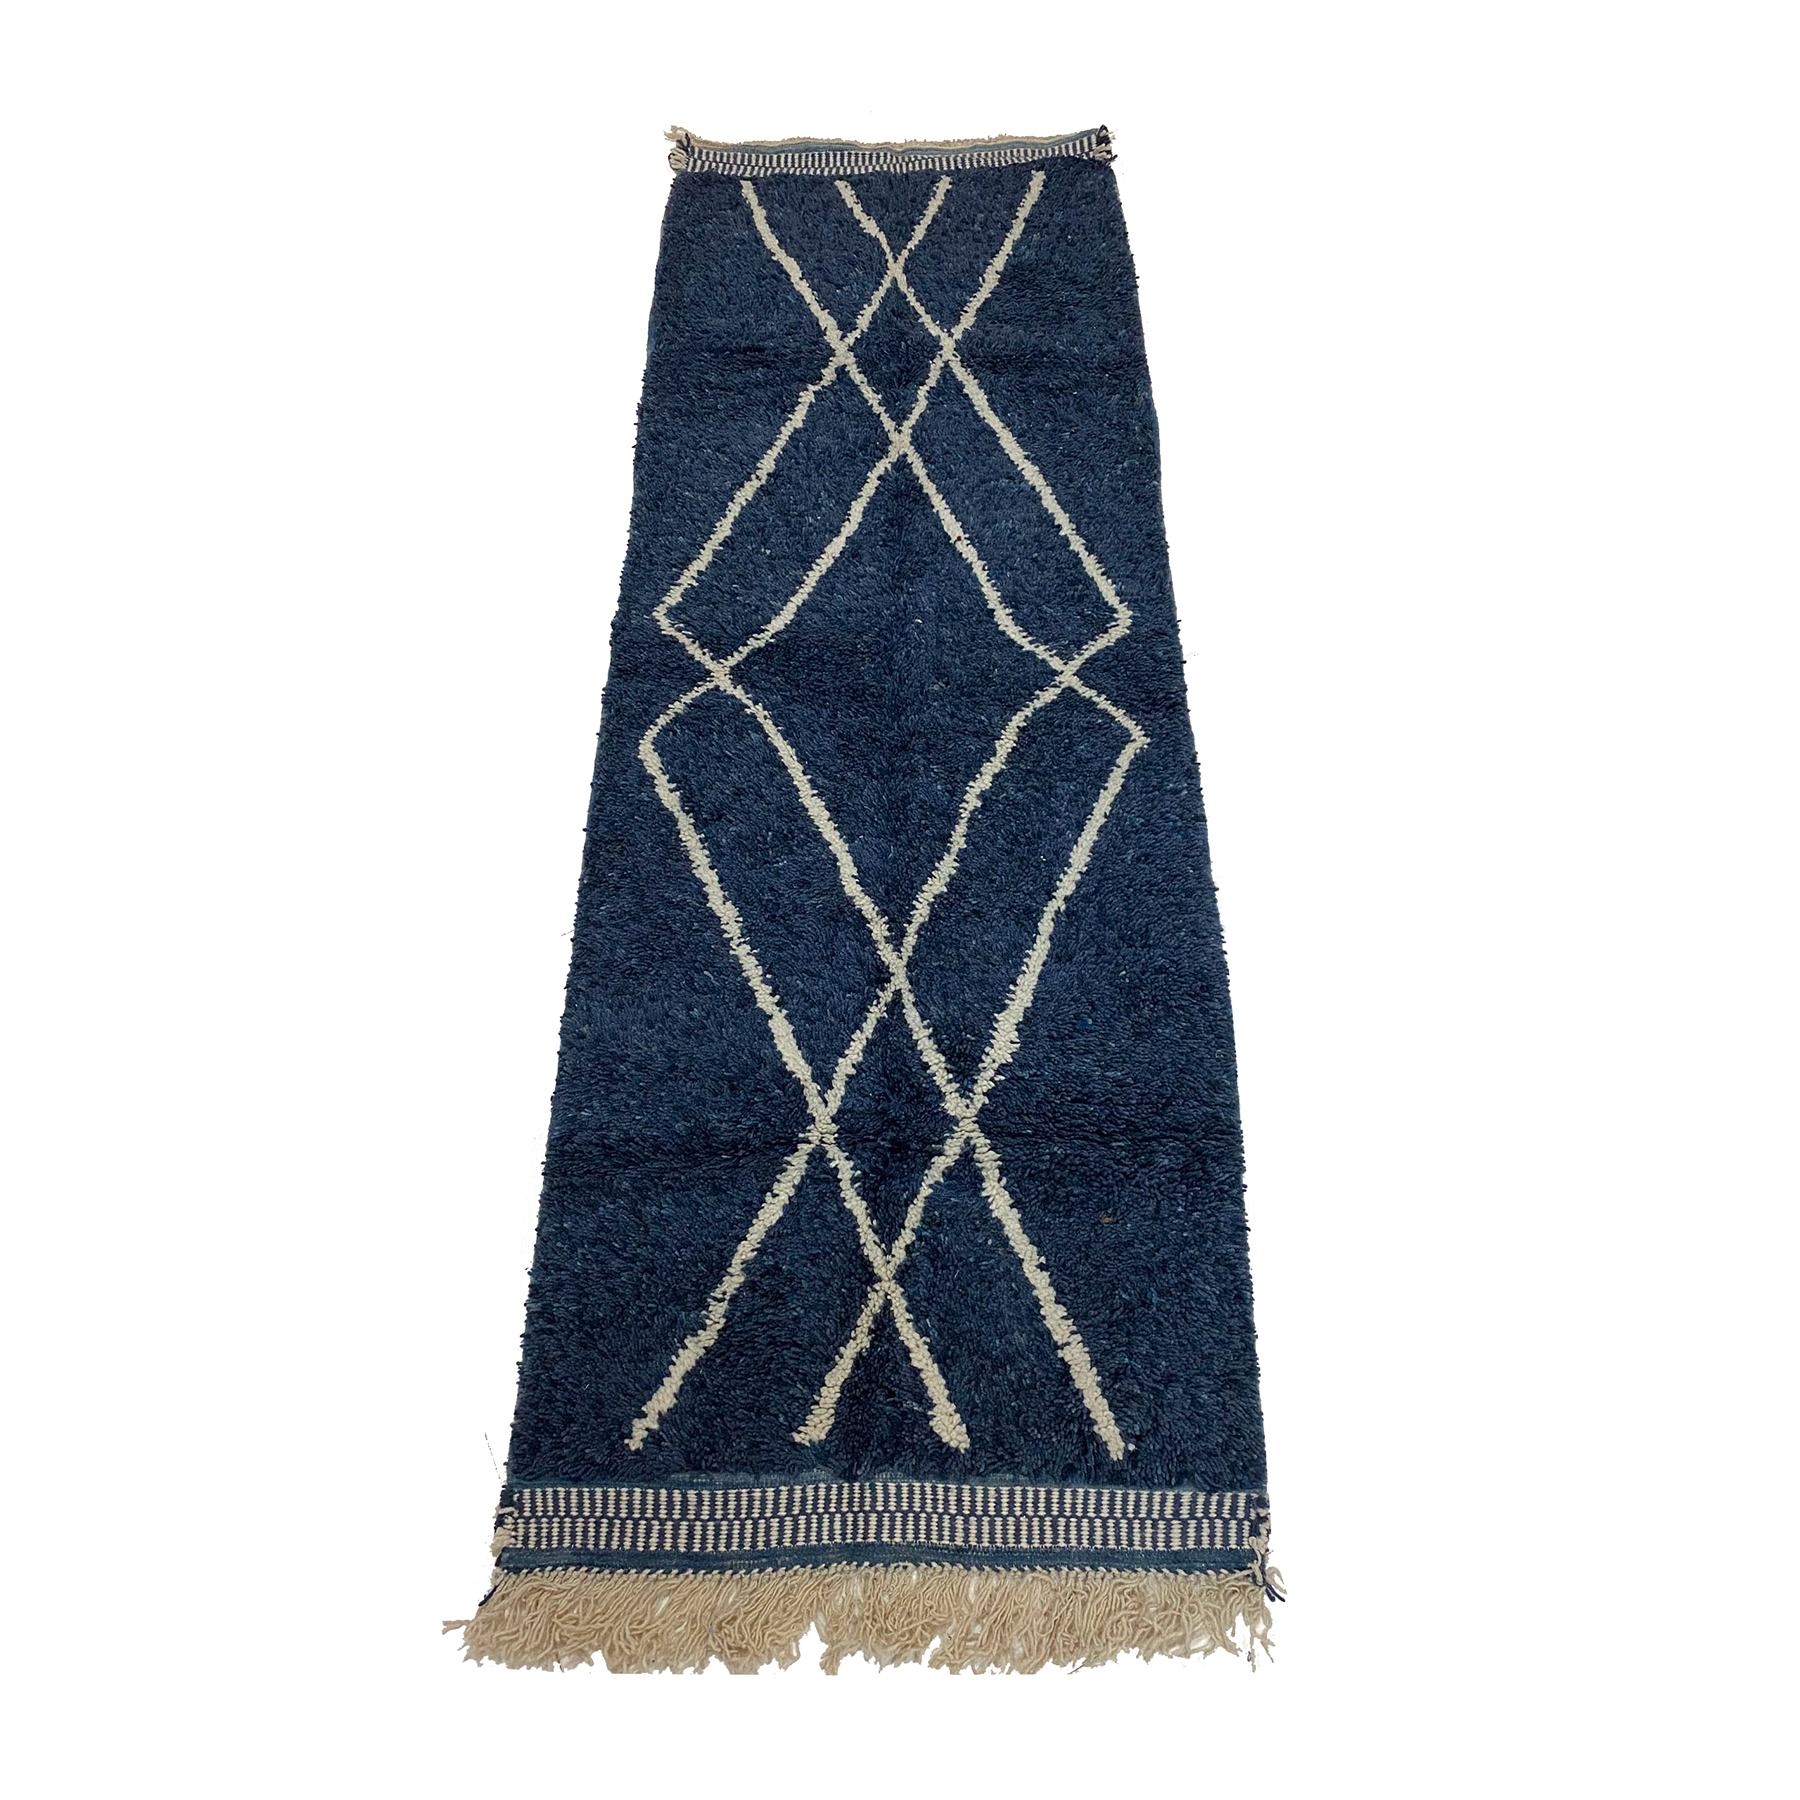 Navy blue Beni Ourain style Moroccan runner rug